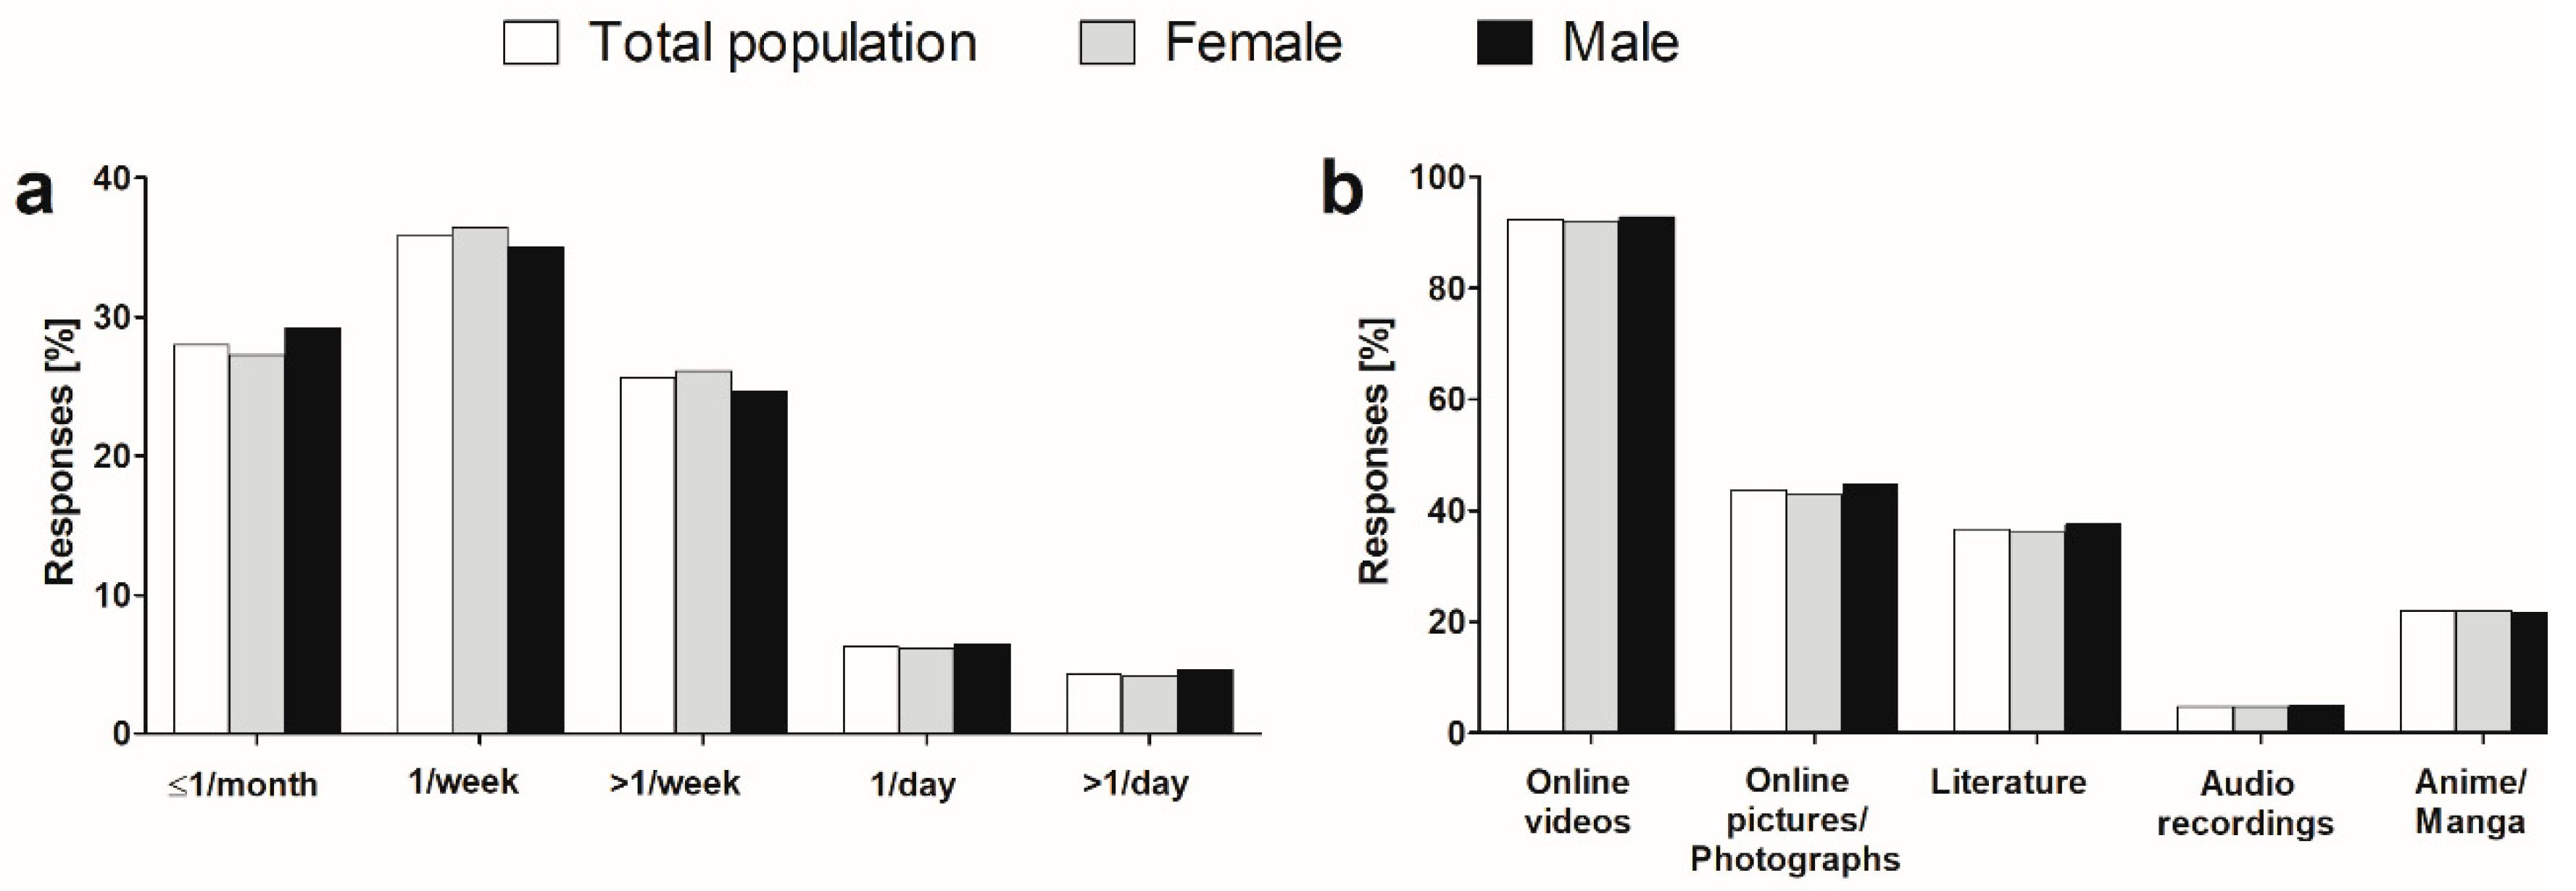 Xxx Te Sey Video X Xxx Sey - IJERPH | Free Full-Text | Prevalence, Patterns and Self-Perceived Effects  of Pornography Consumption in Polish University Students: A Cross-Sectional  Study